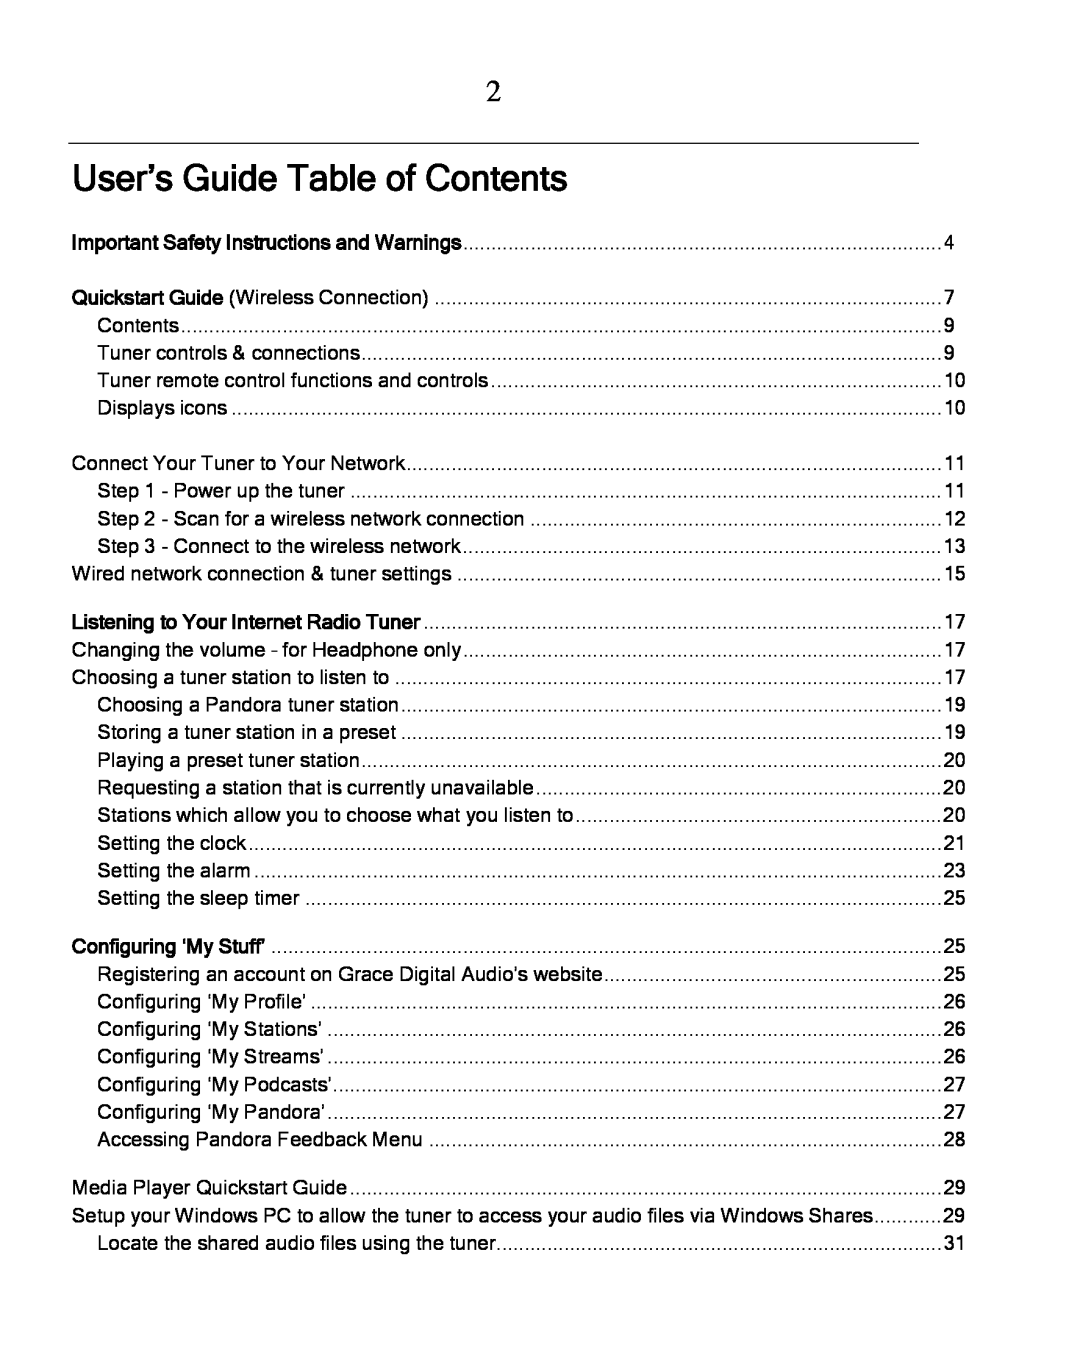 Grace GDI-IRDT200 manual User’s Guide Table of Contents 